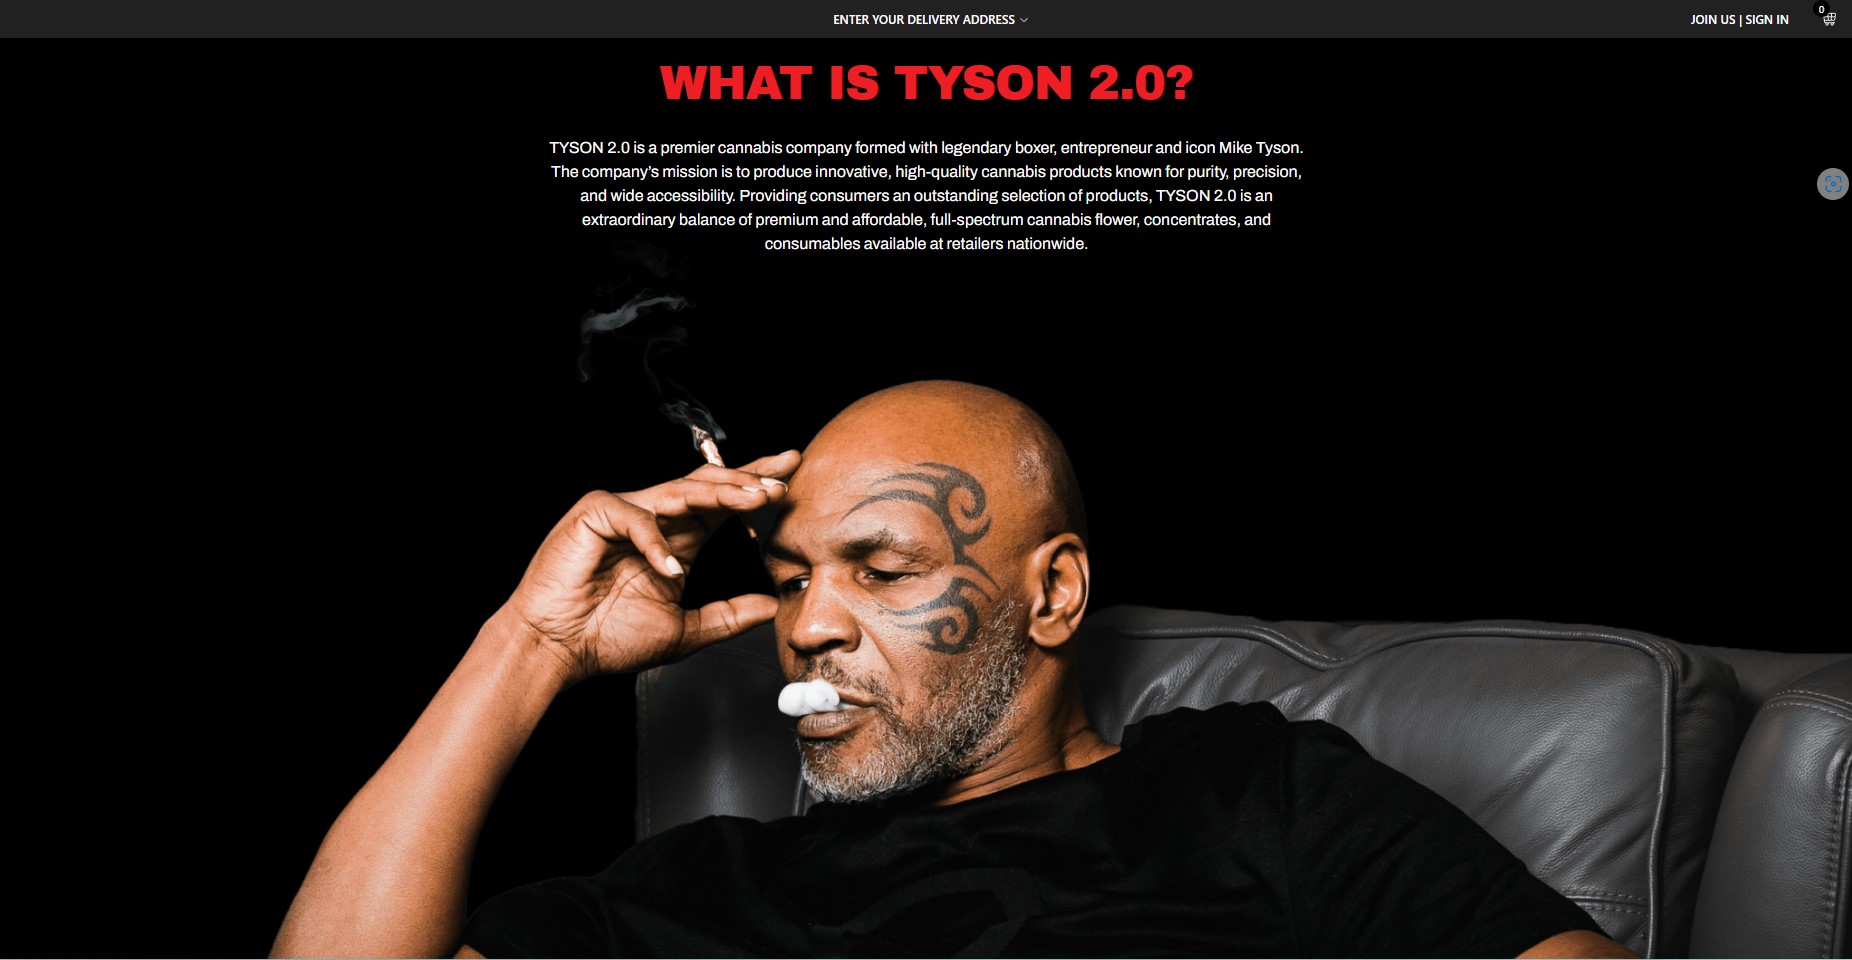 5 Examples of Great Cannabis Branding From Tyson 2.0 Website